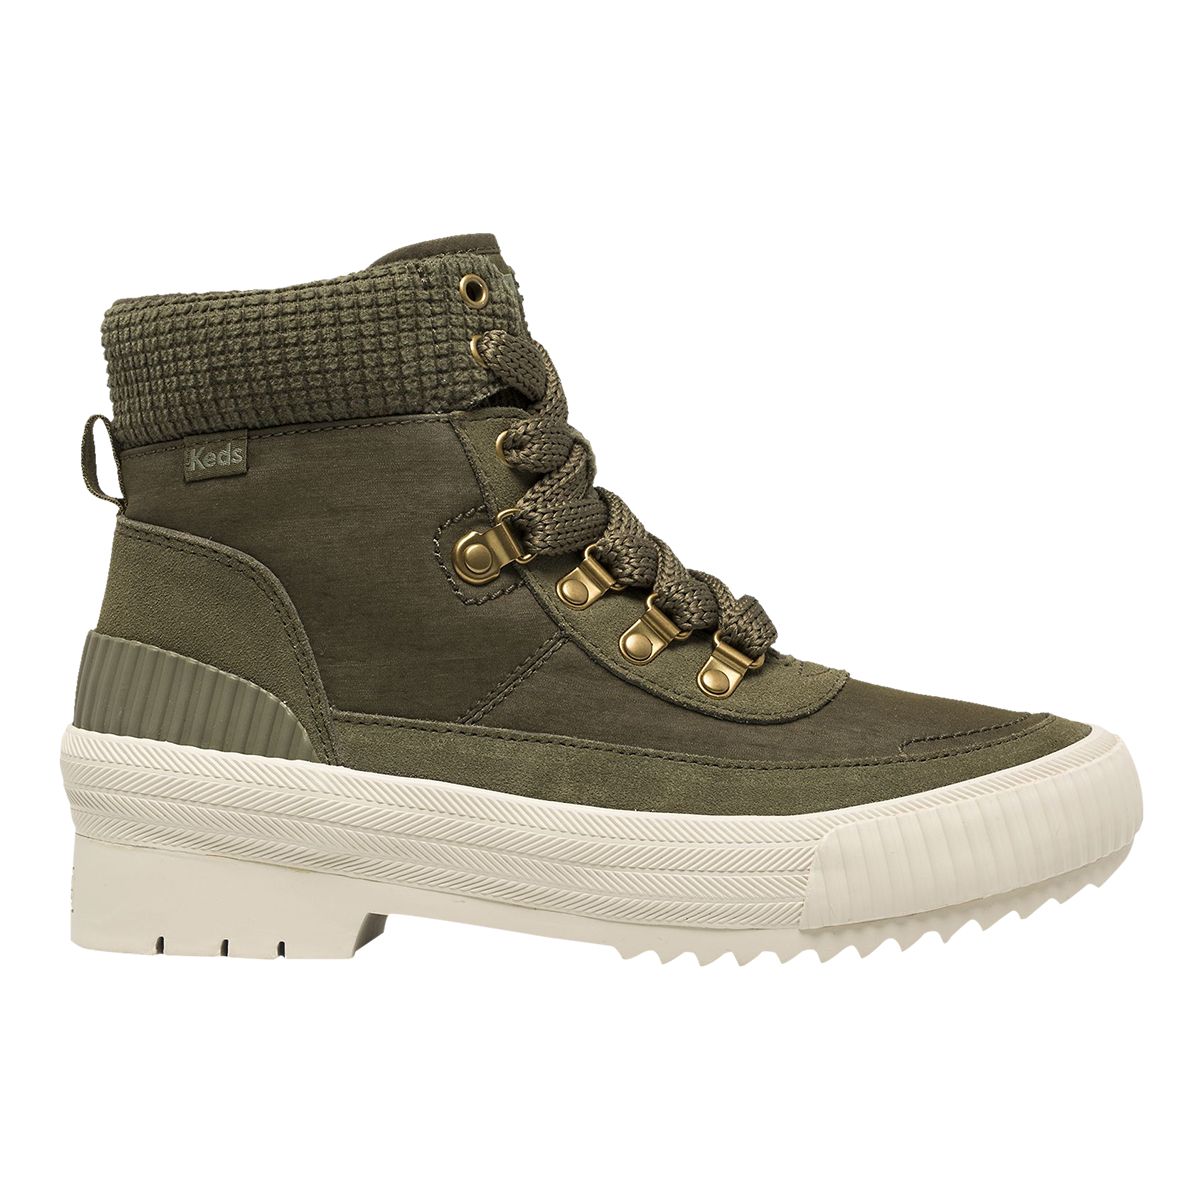 Image of Keds Women's Fielder Boots - Olive